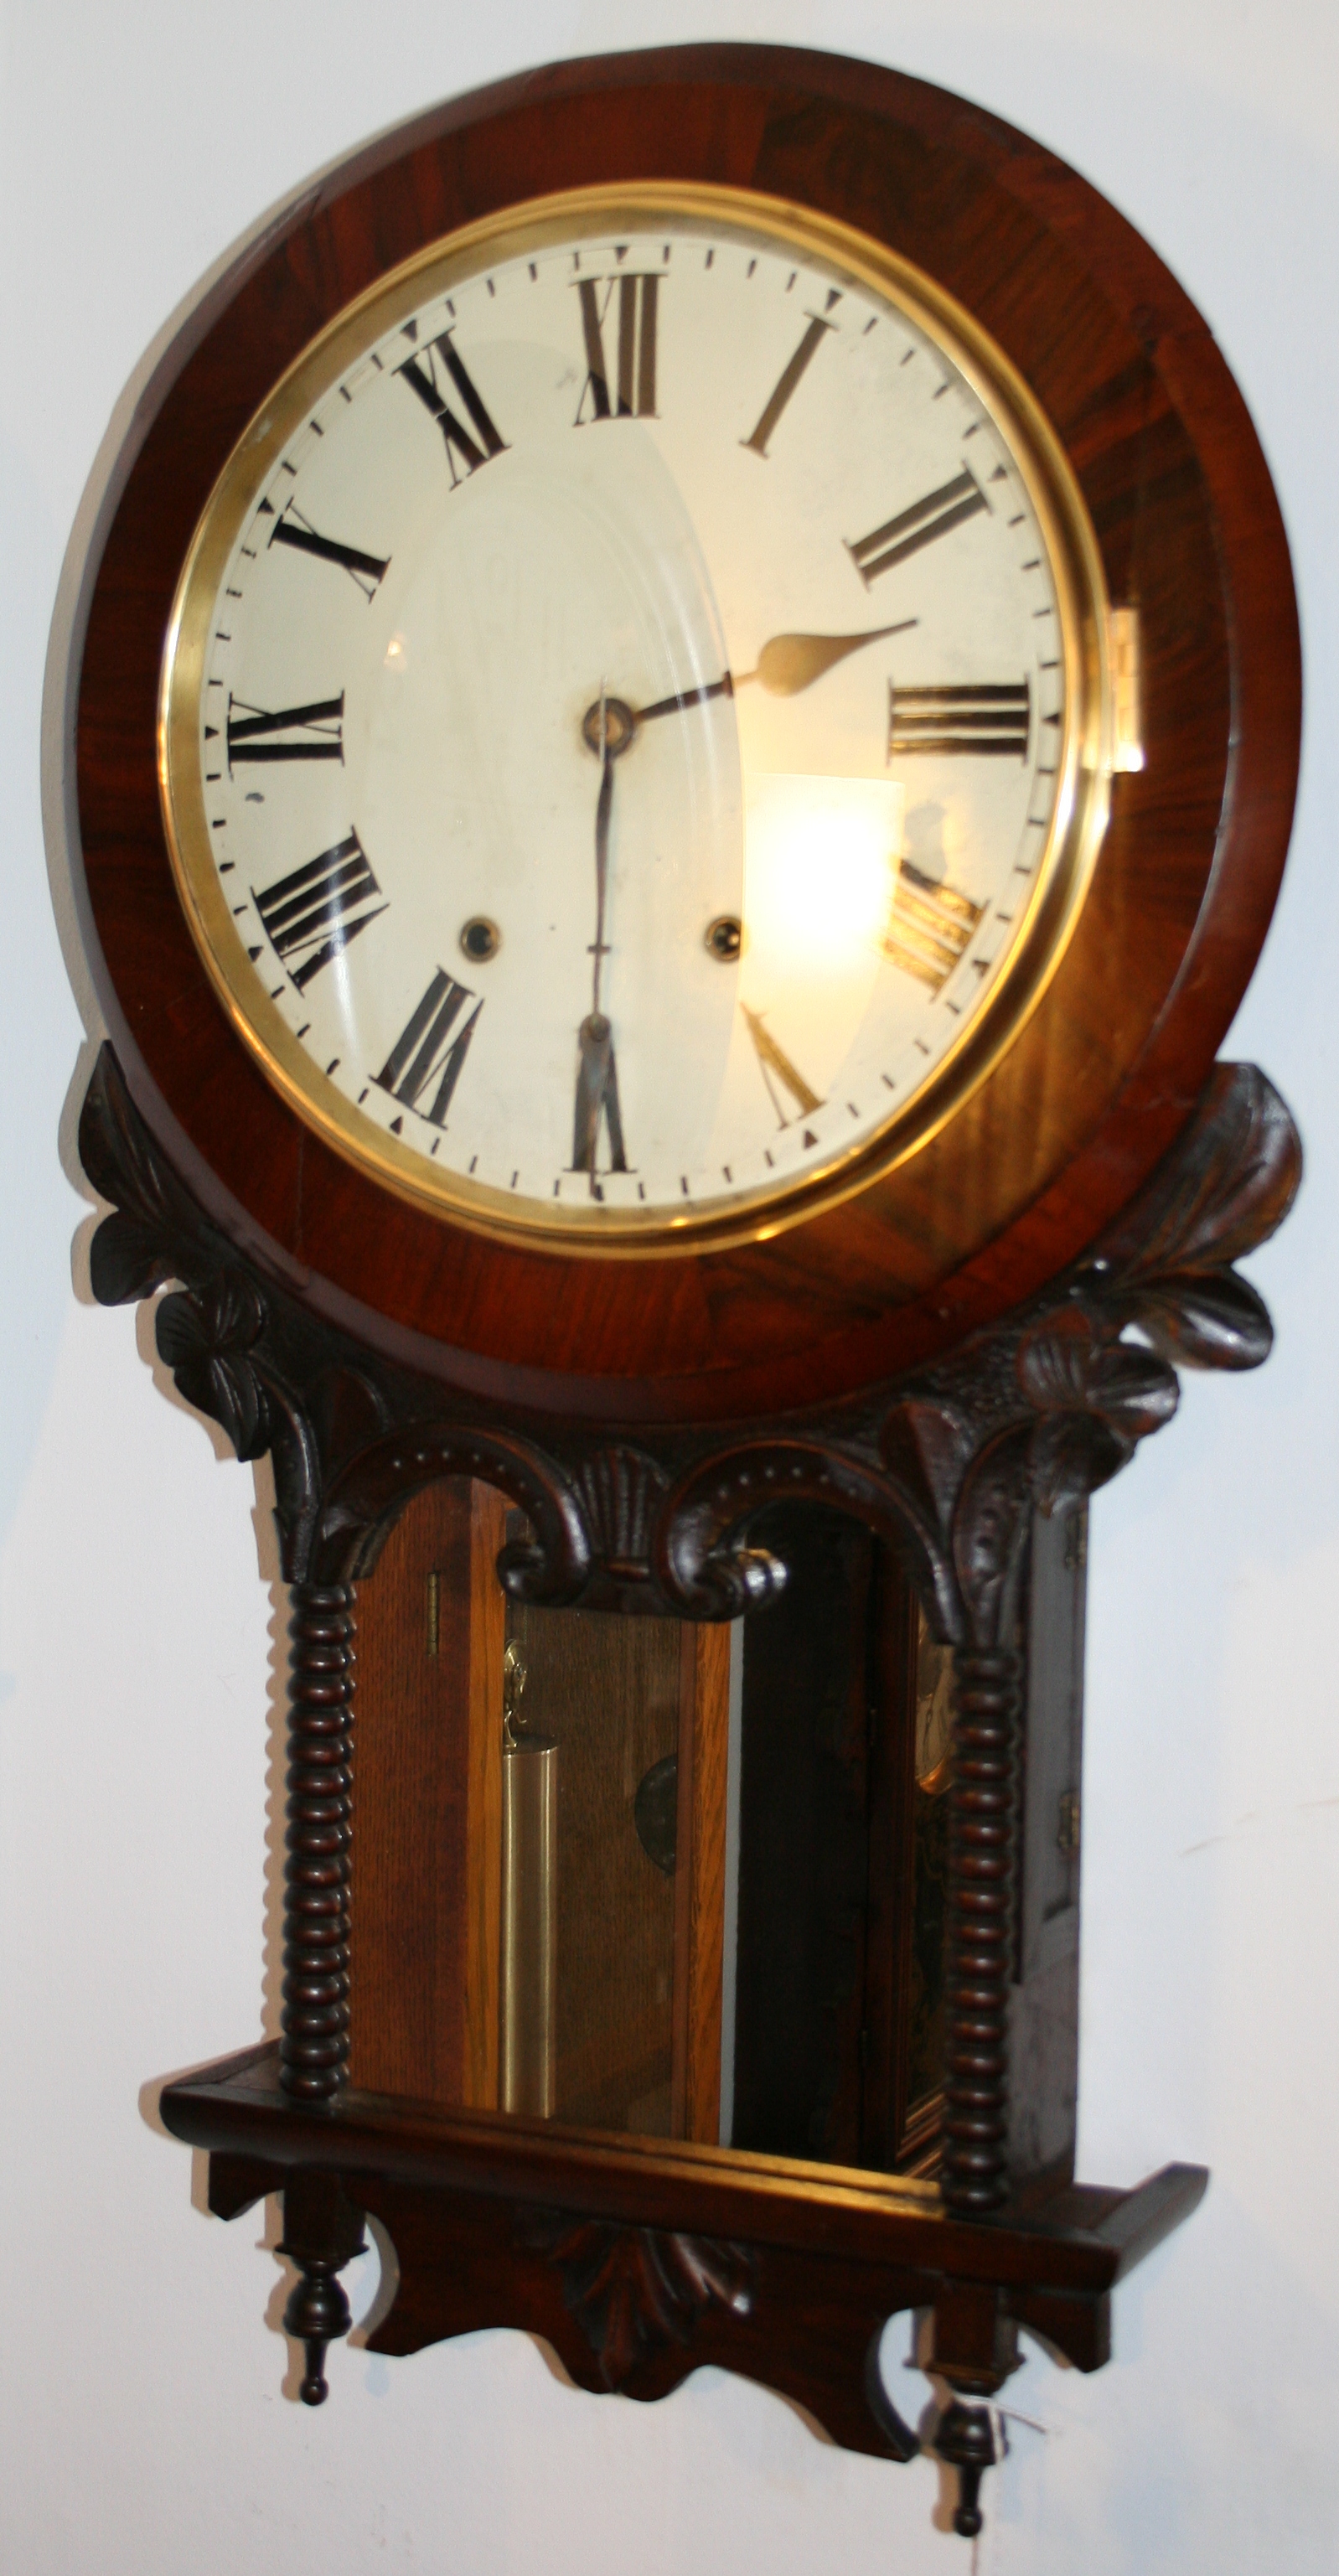 Antique Wall Clocks For Sale